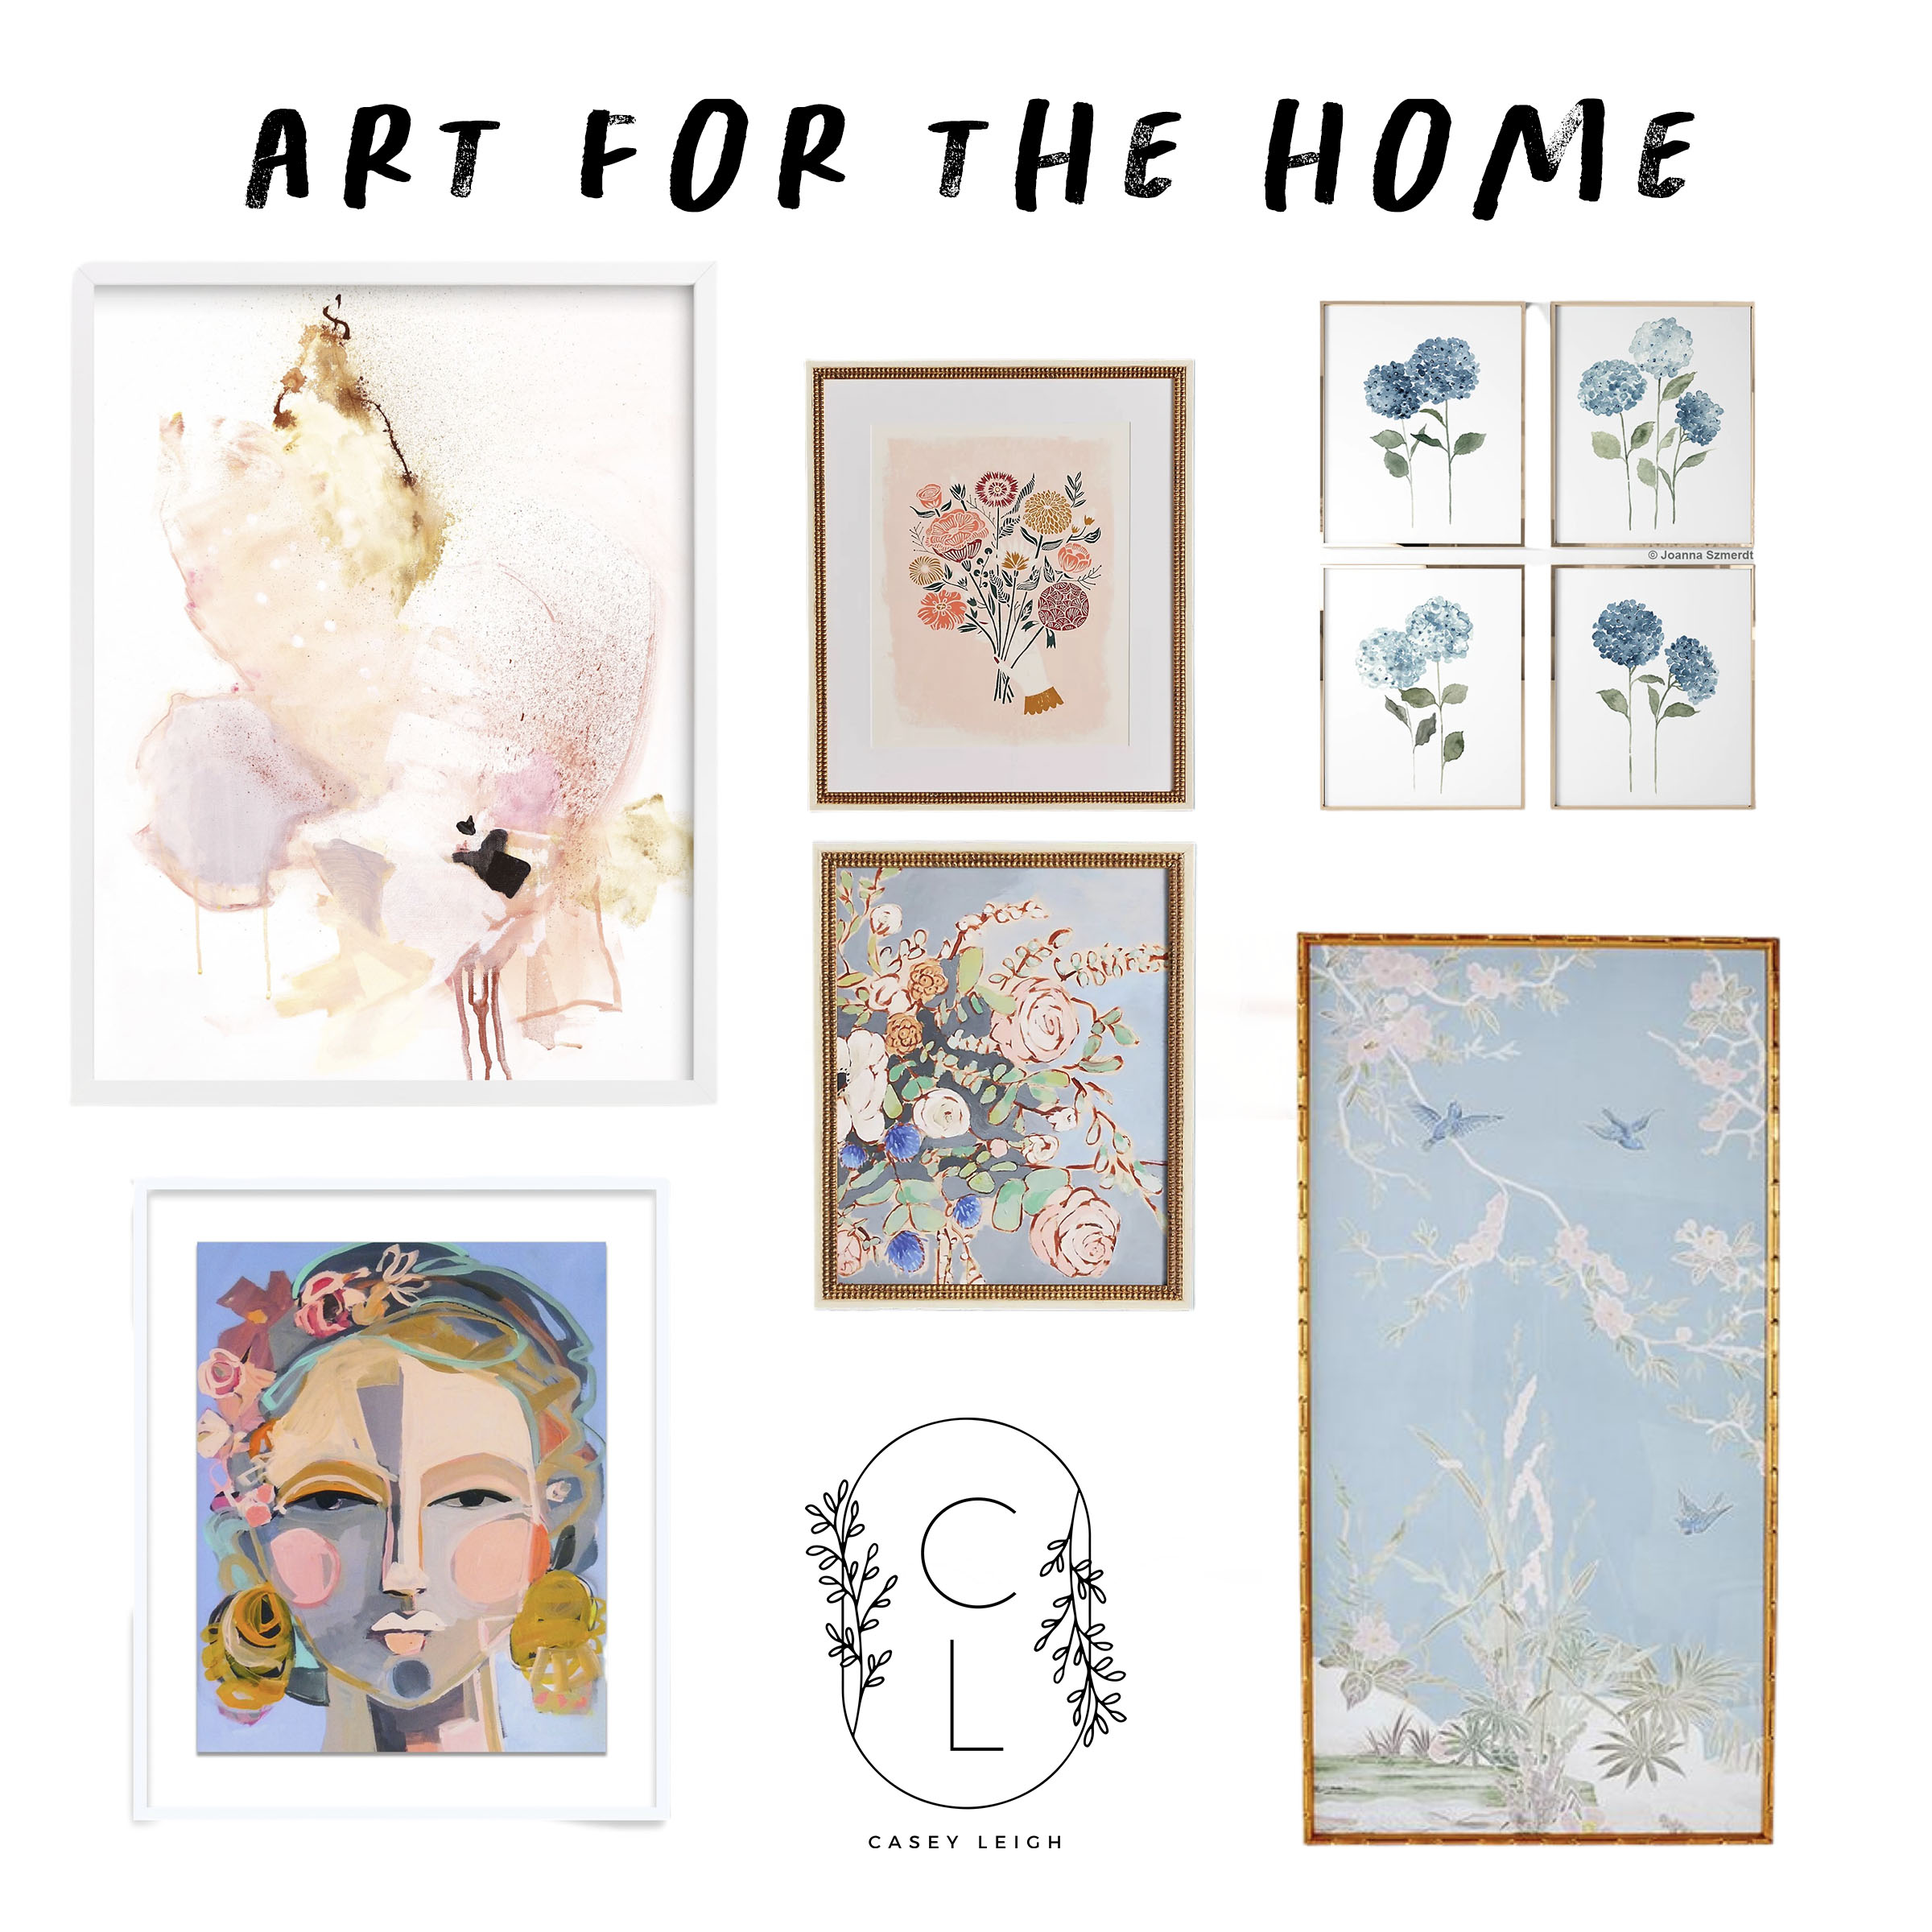 Art for the Home - Casey Wiegand of The Wiegands